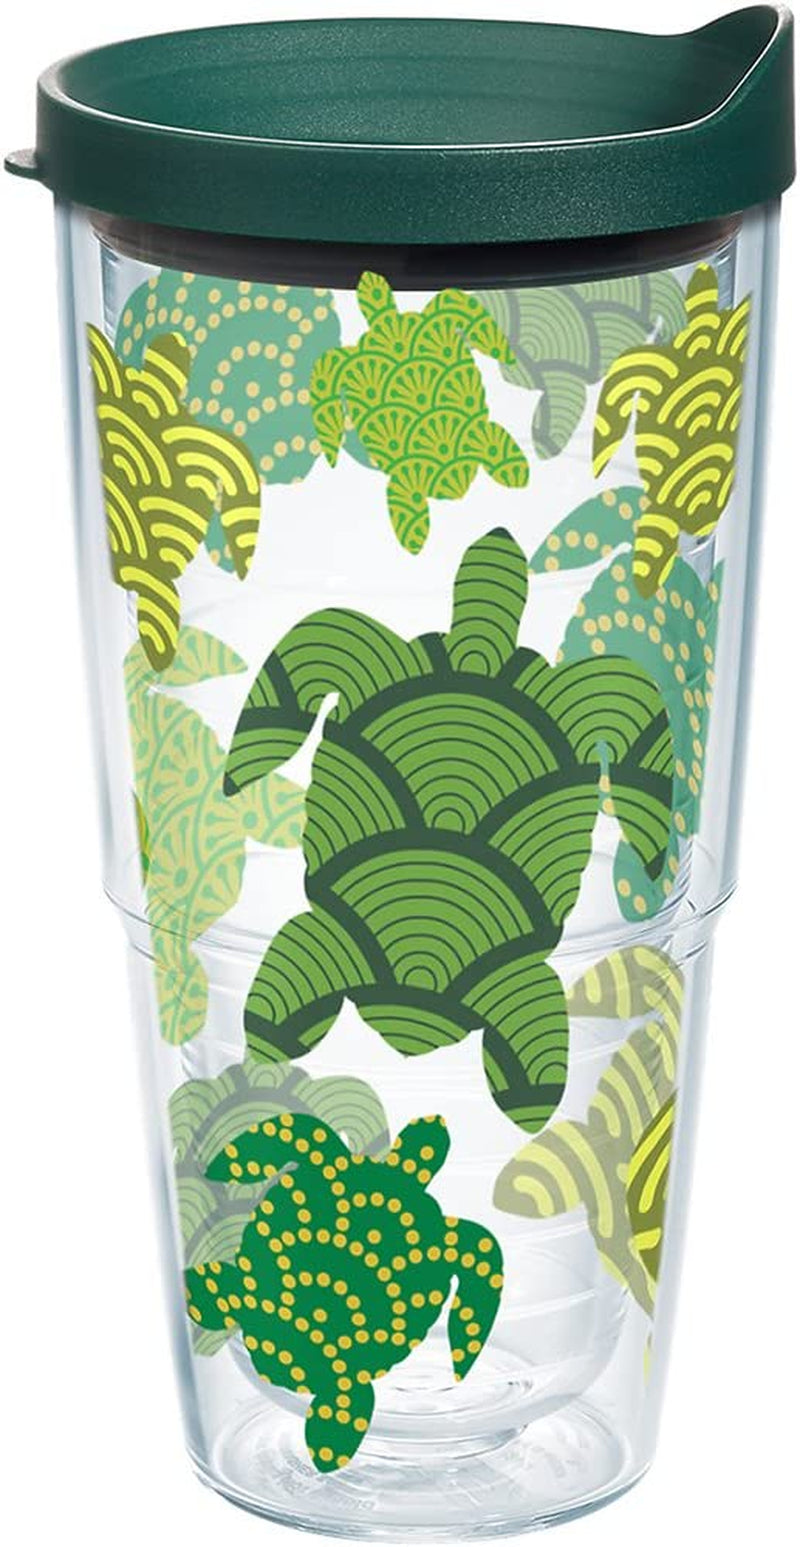 Tervis Turtle Pattern Made in USA Double Walled Insulated Tumbler, 16 Oz, Clear